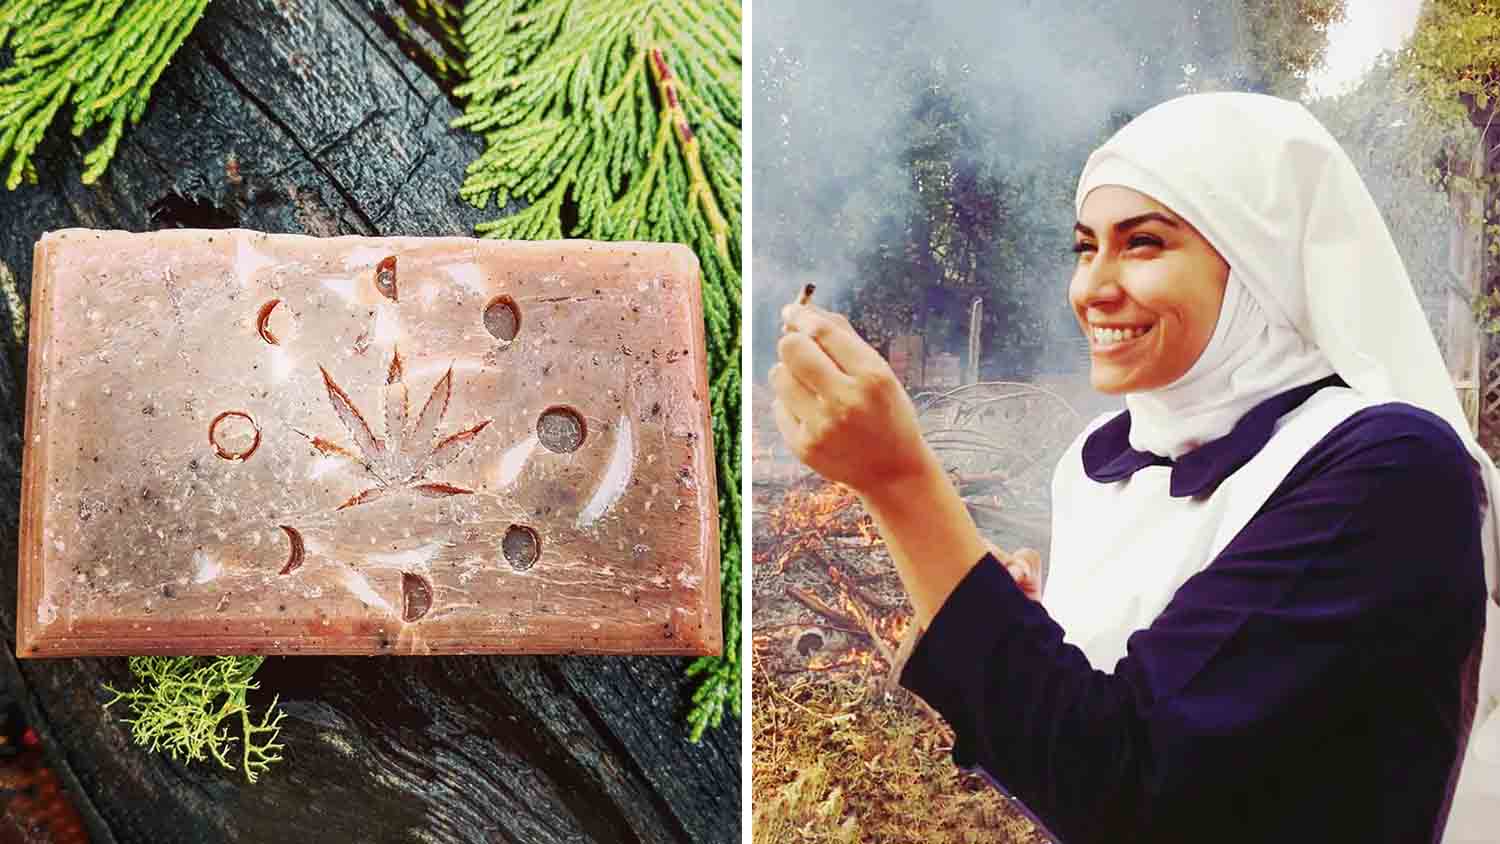 You Can Now Buy Vegan CBD-Infused Soap Made by Nuns